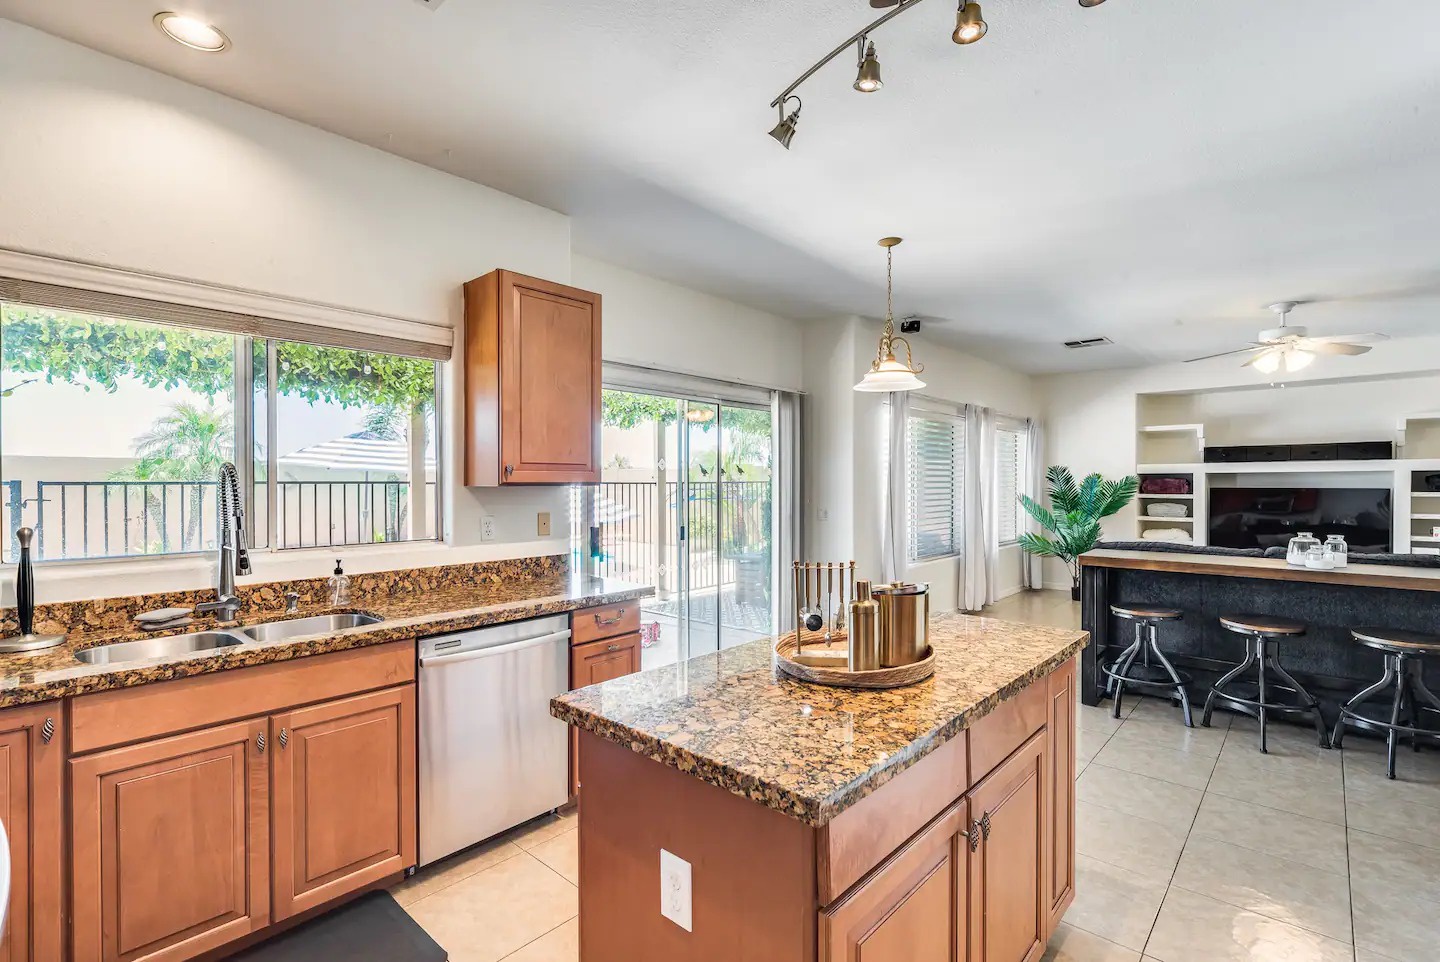 Peoria Vacation Rentals, Cherry Hills - From the kitchen walk right outside to the yard/pool area